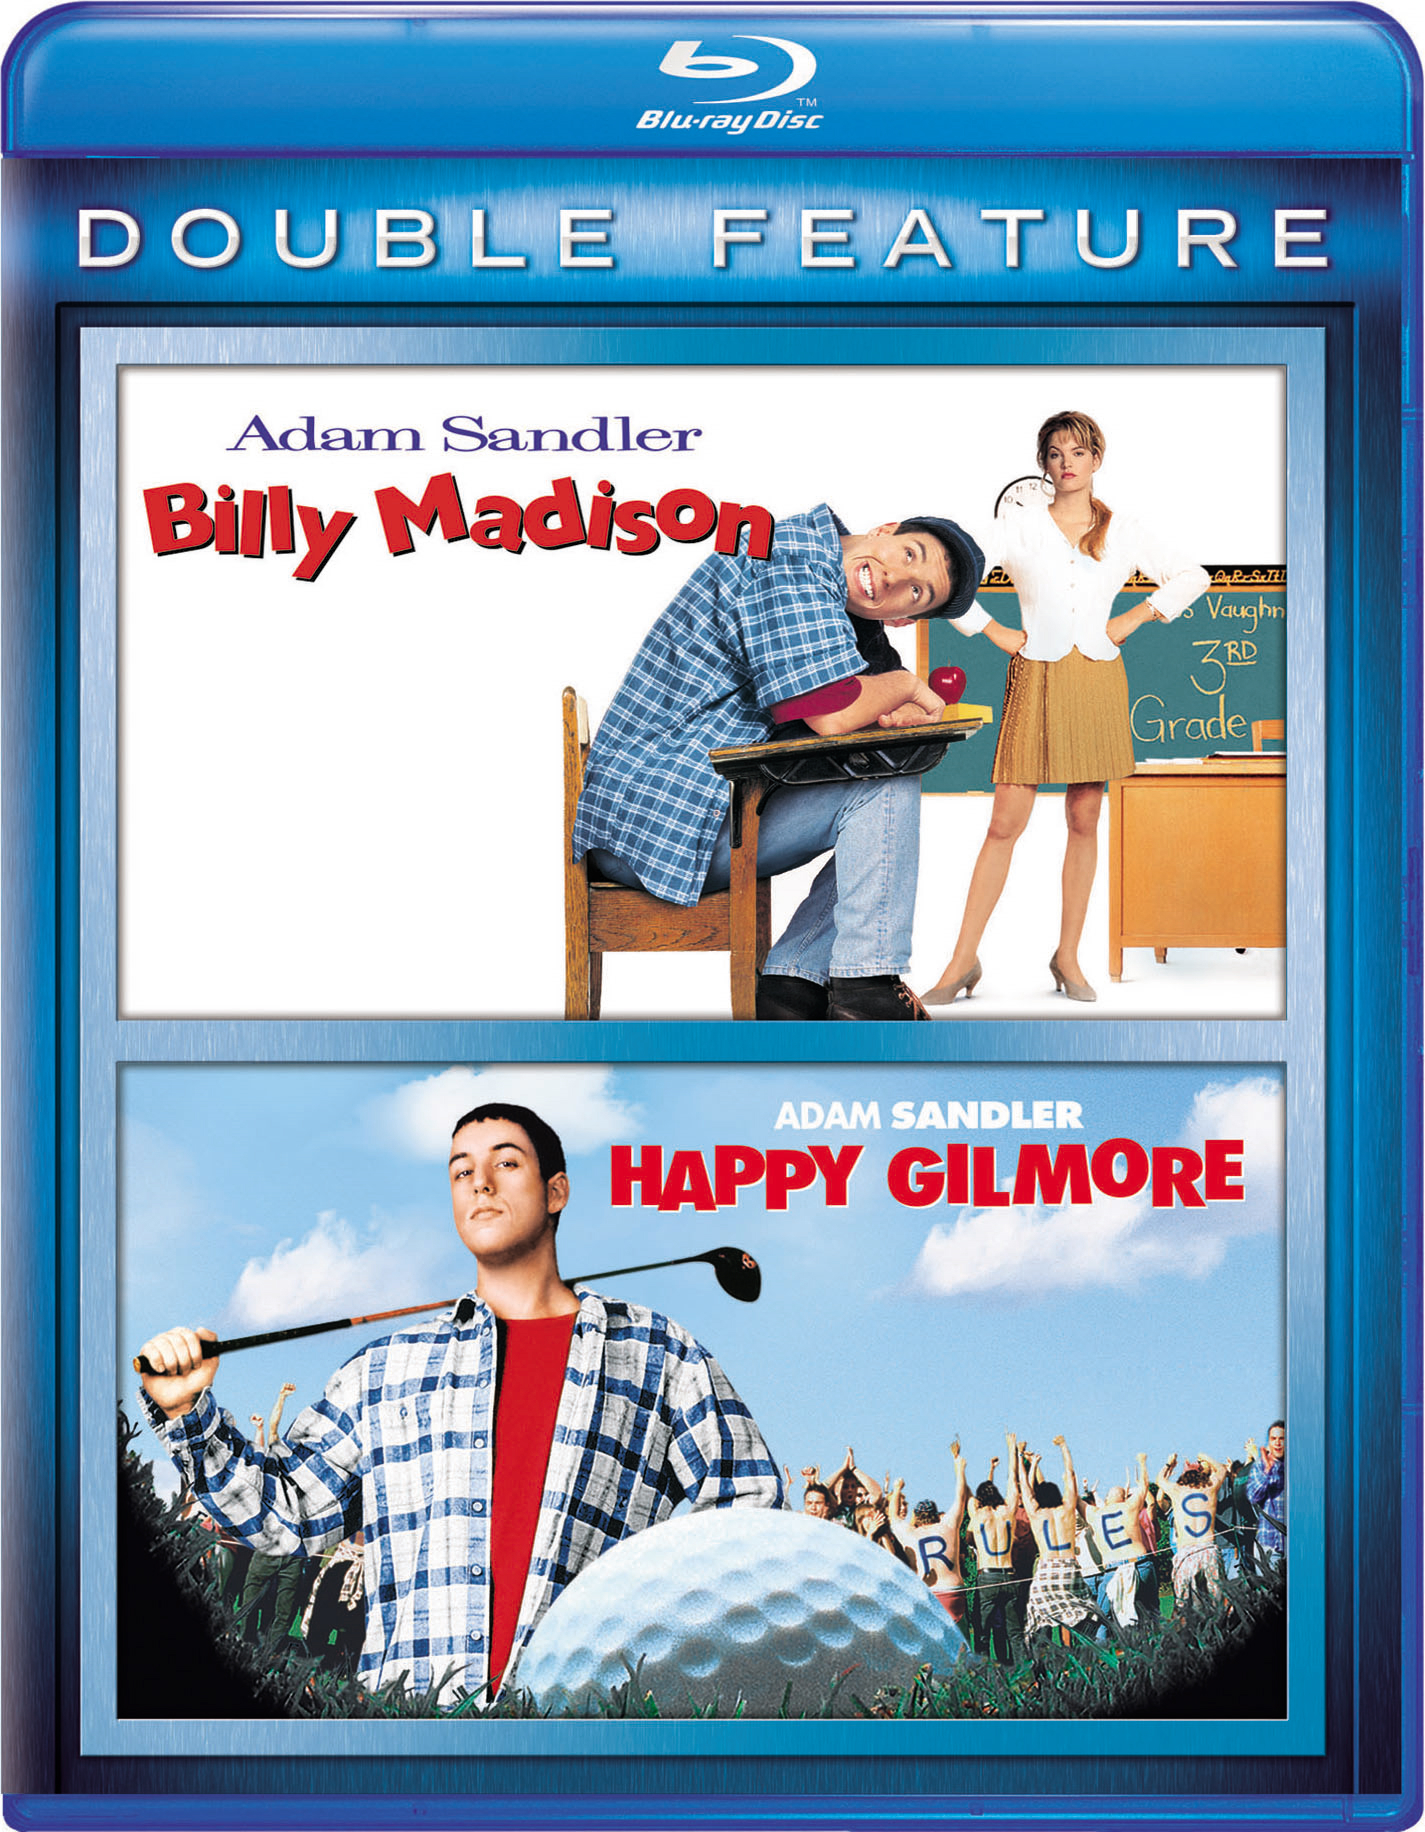 Happy Gilmore/Billy Madison (Blu-ray Double Feature) - Blu-ray   - Comedy Movies On Blu-ray - Movies On GRUV